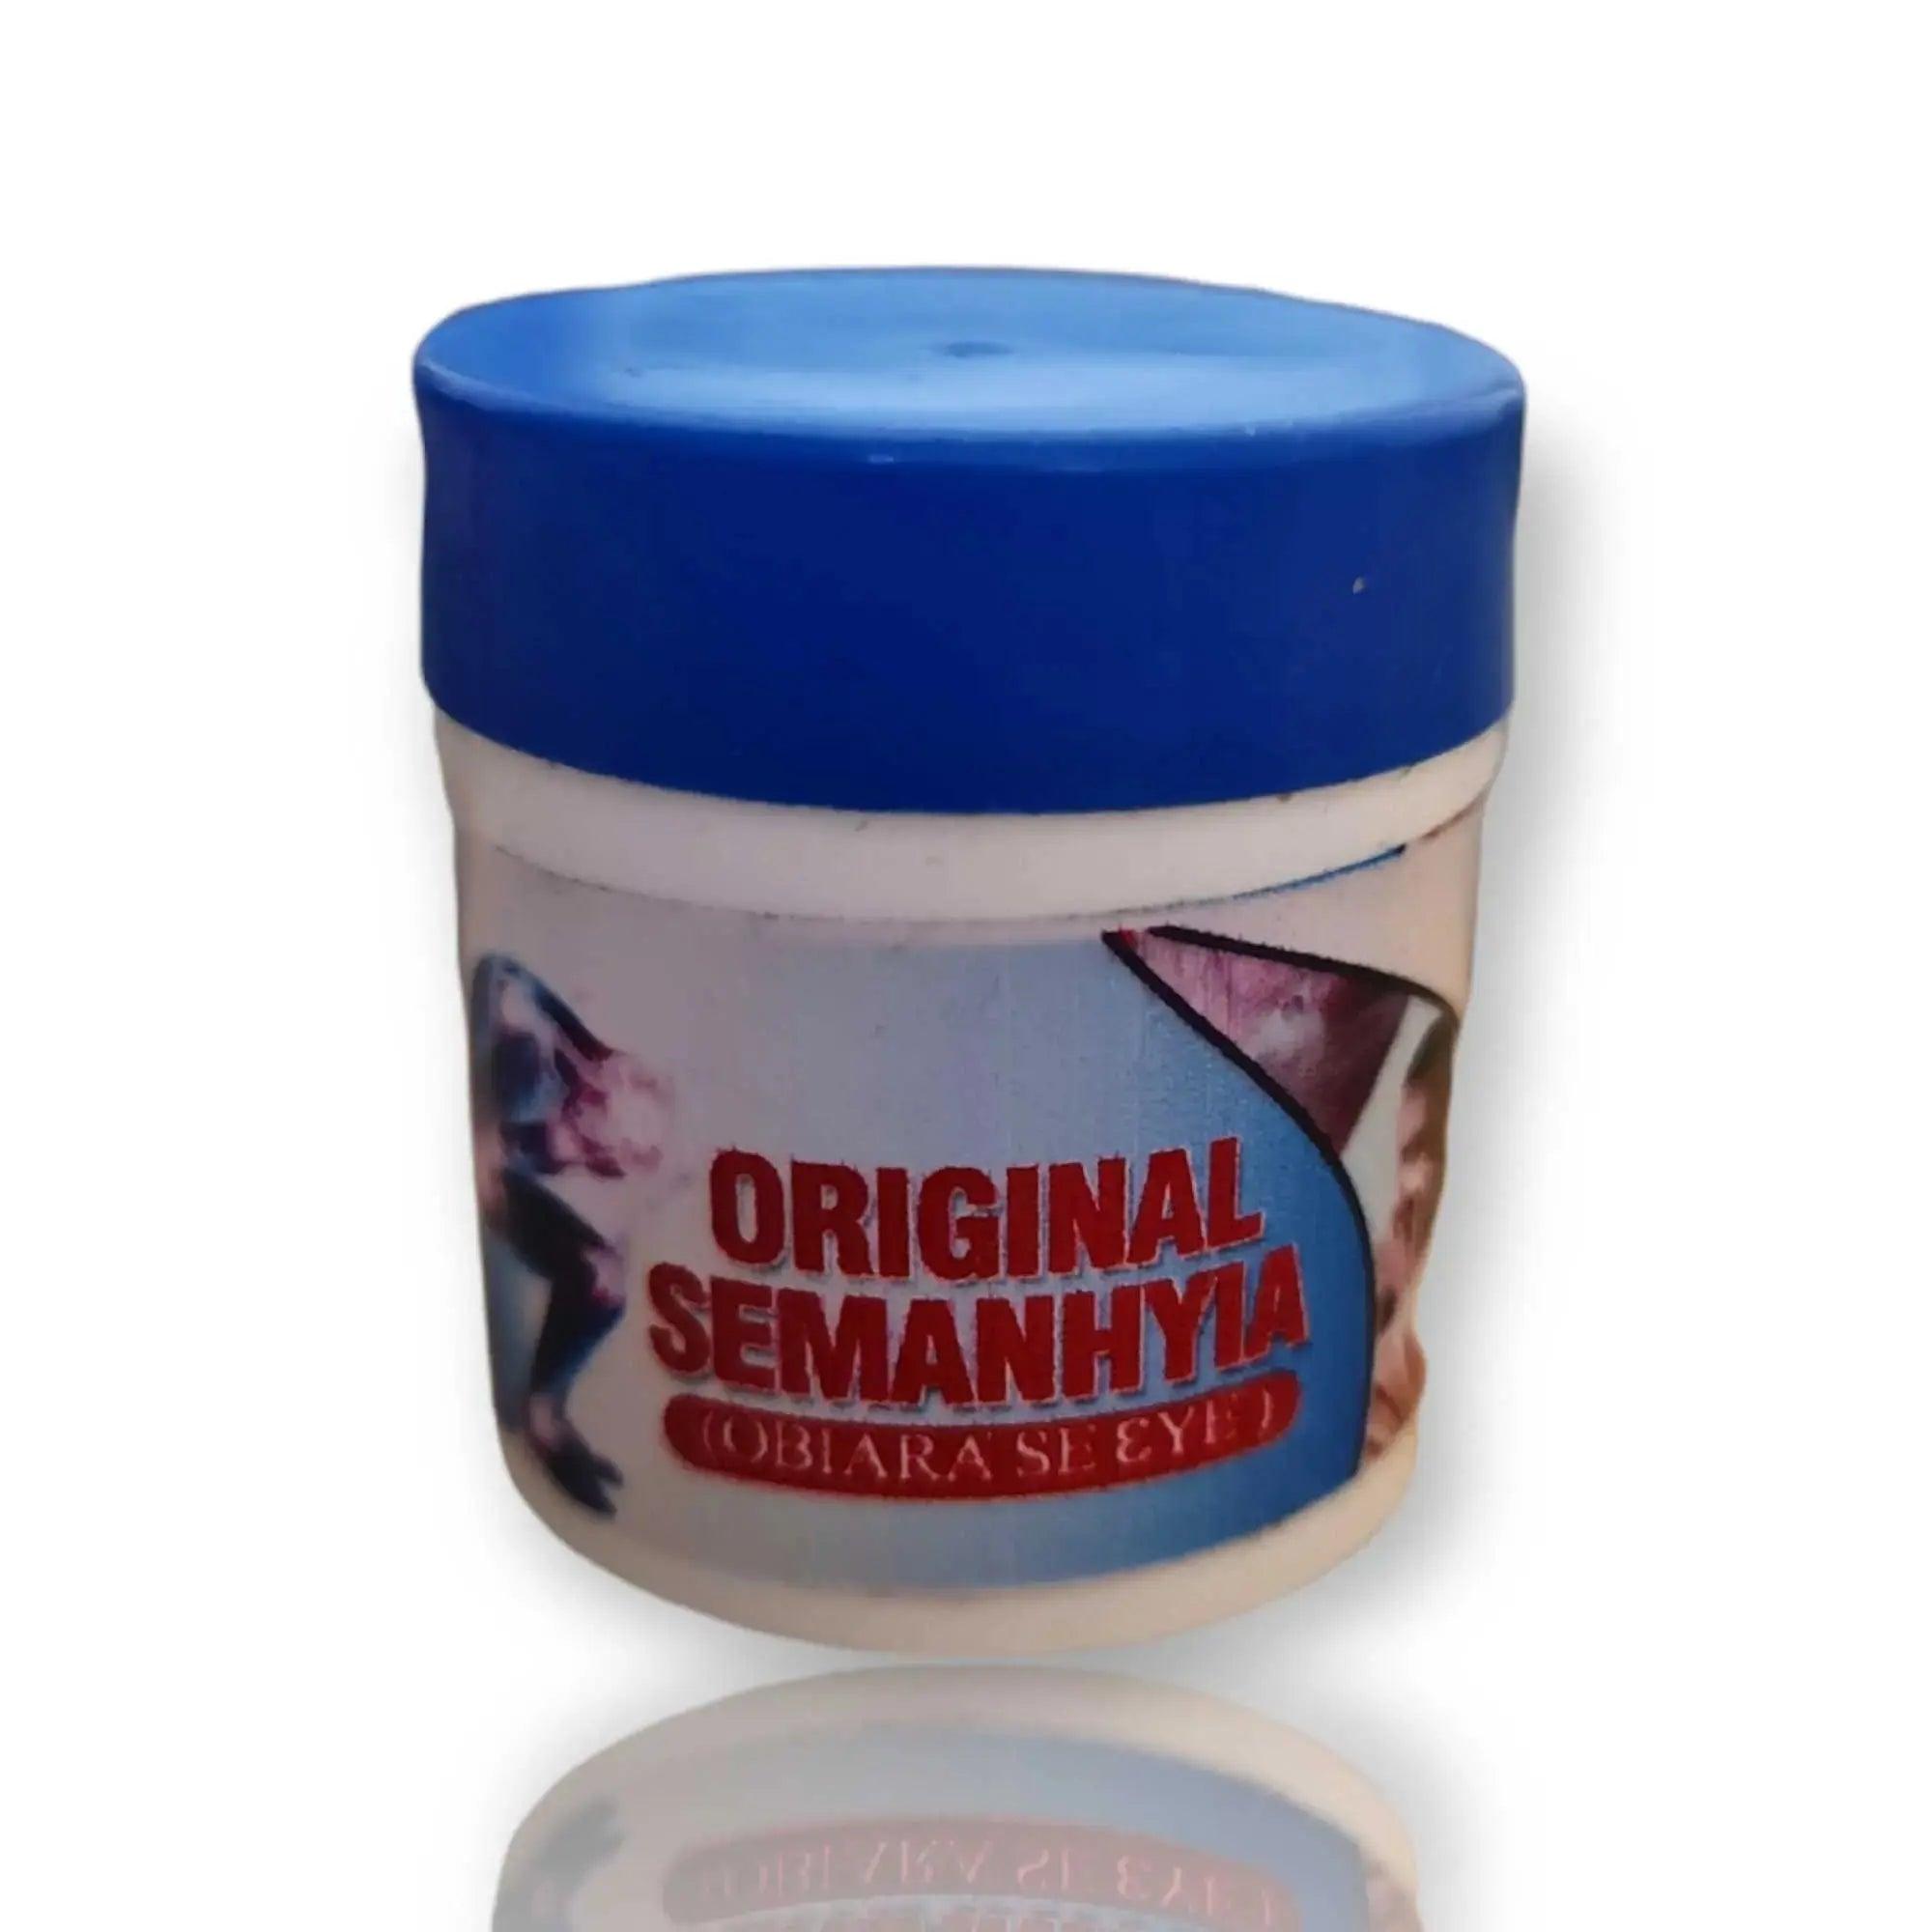 Traditional Herbal Remedy: Original Semanhyia (Obiara Se Eye) for Natural Relief from Various Ailments - Honesty Sales U.K